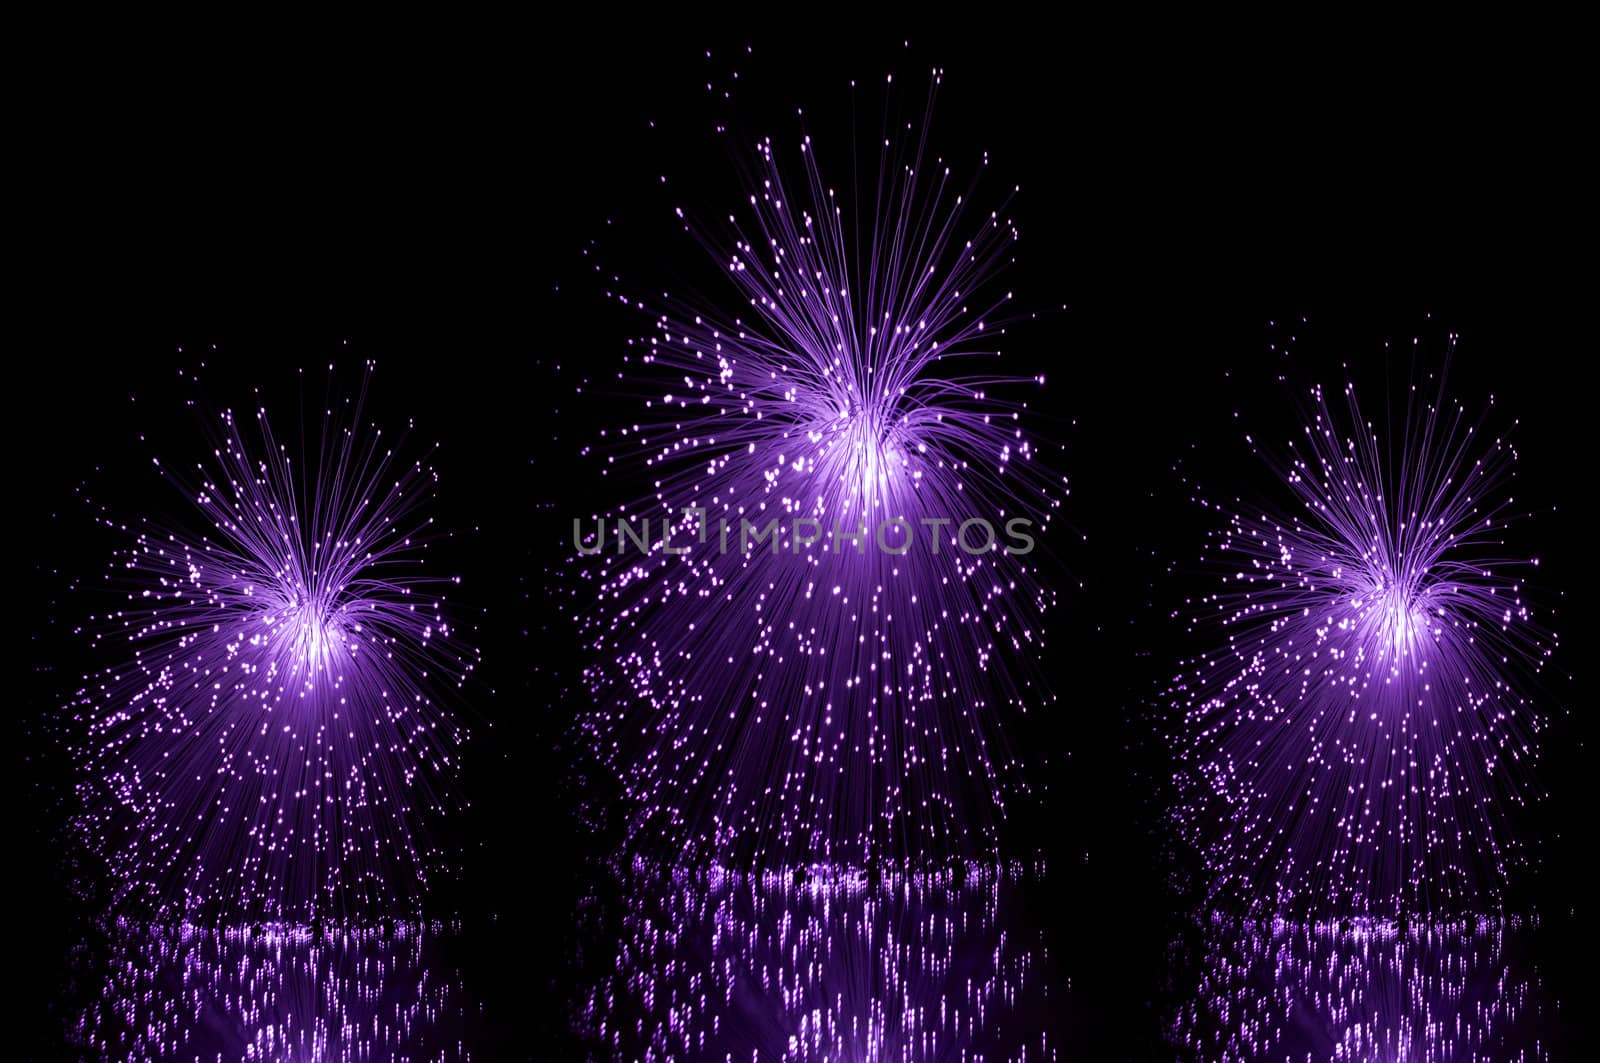 Low level angle capturing three violet groups of illuminated fibre optic light strands against a black background and reflecting into the foreground.